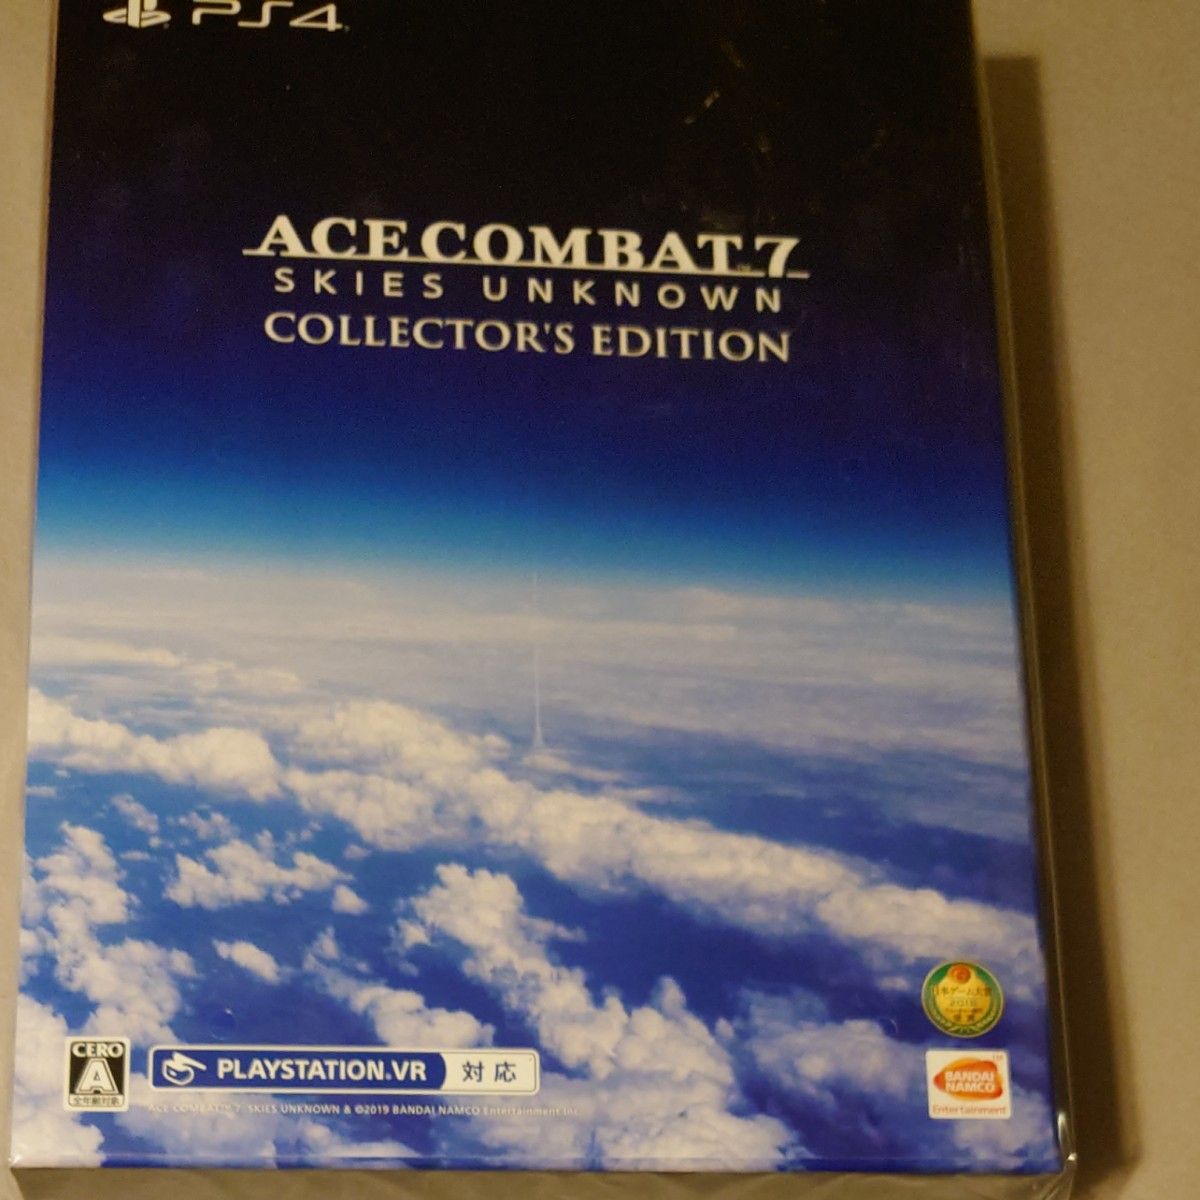 【PS4】 ACE COMBAT 7 SKIES UNKNOWN COLLECTOR S EDITION [限定版] Yahoo!フリマ（旧）のサムネイル